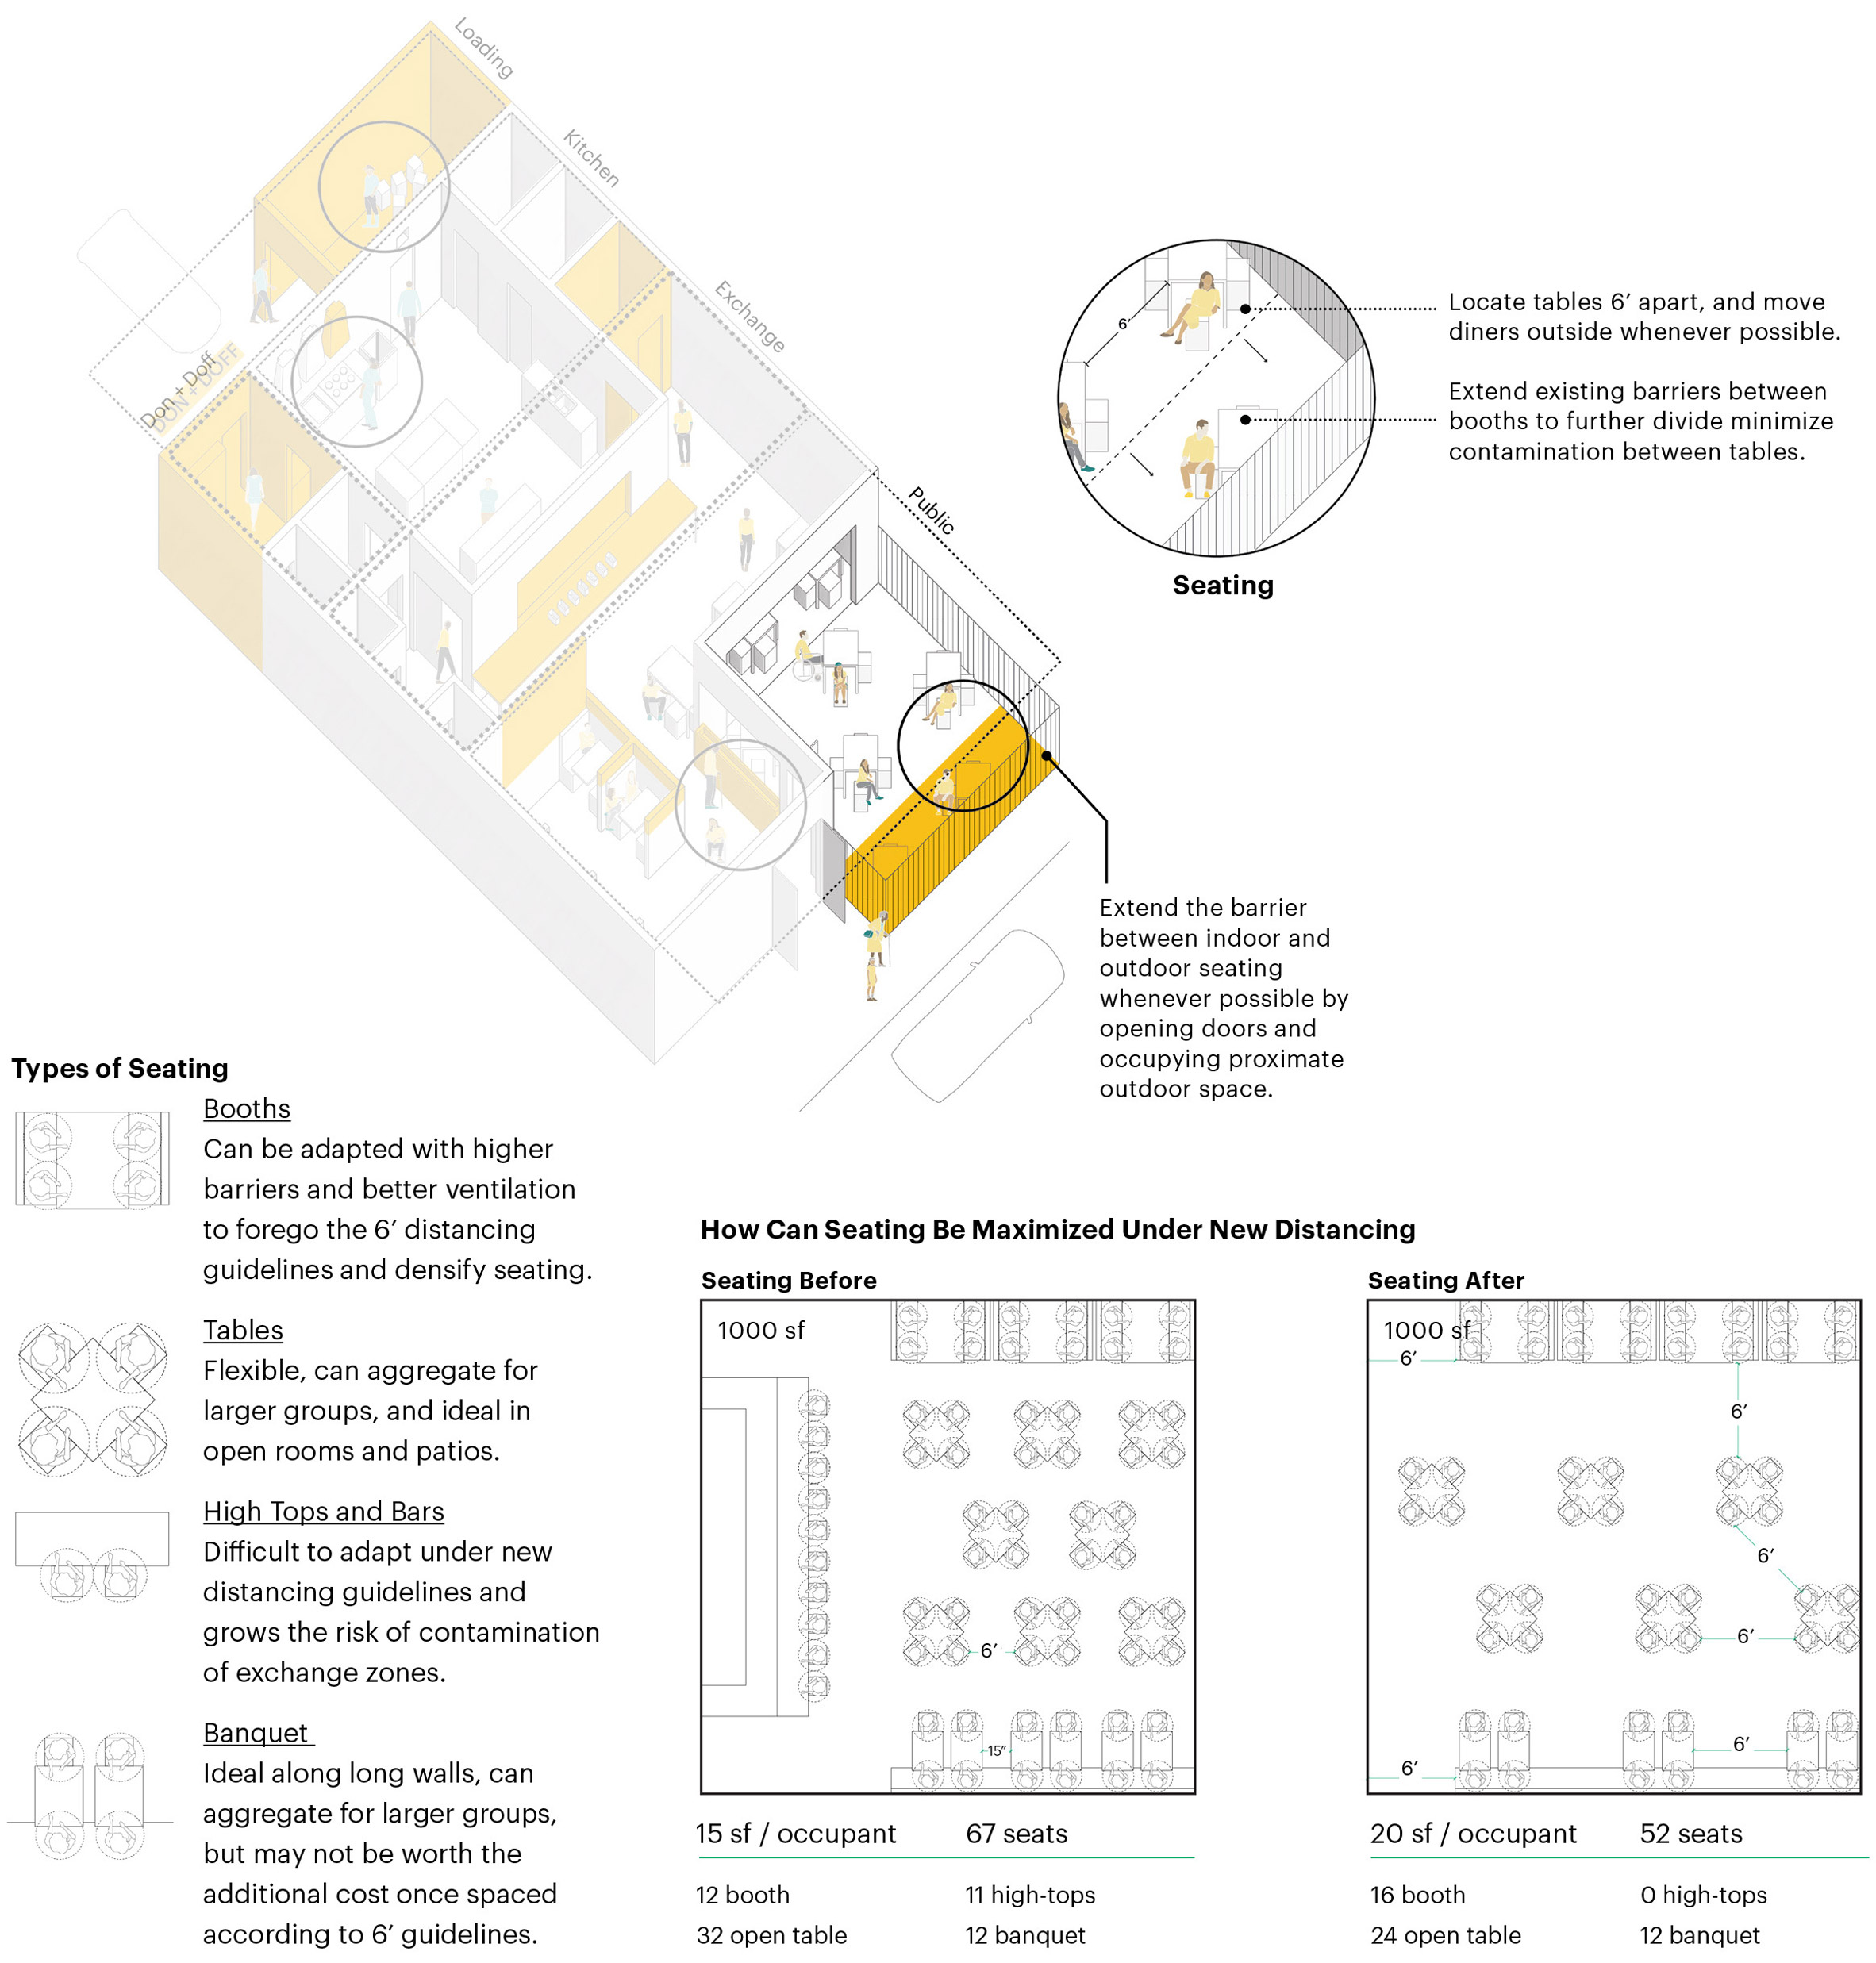 Spatial Strategies for restaurant design by MASS Design Group